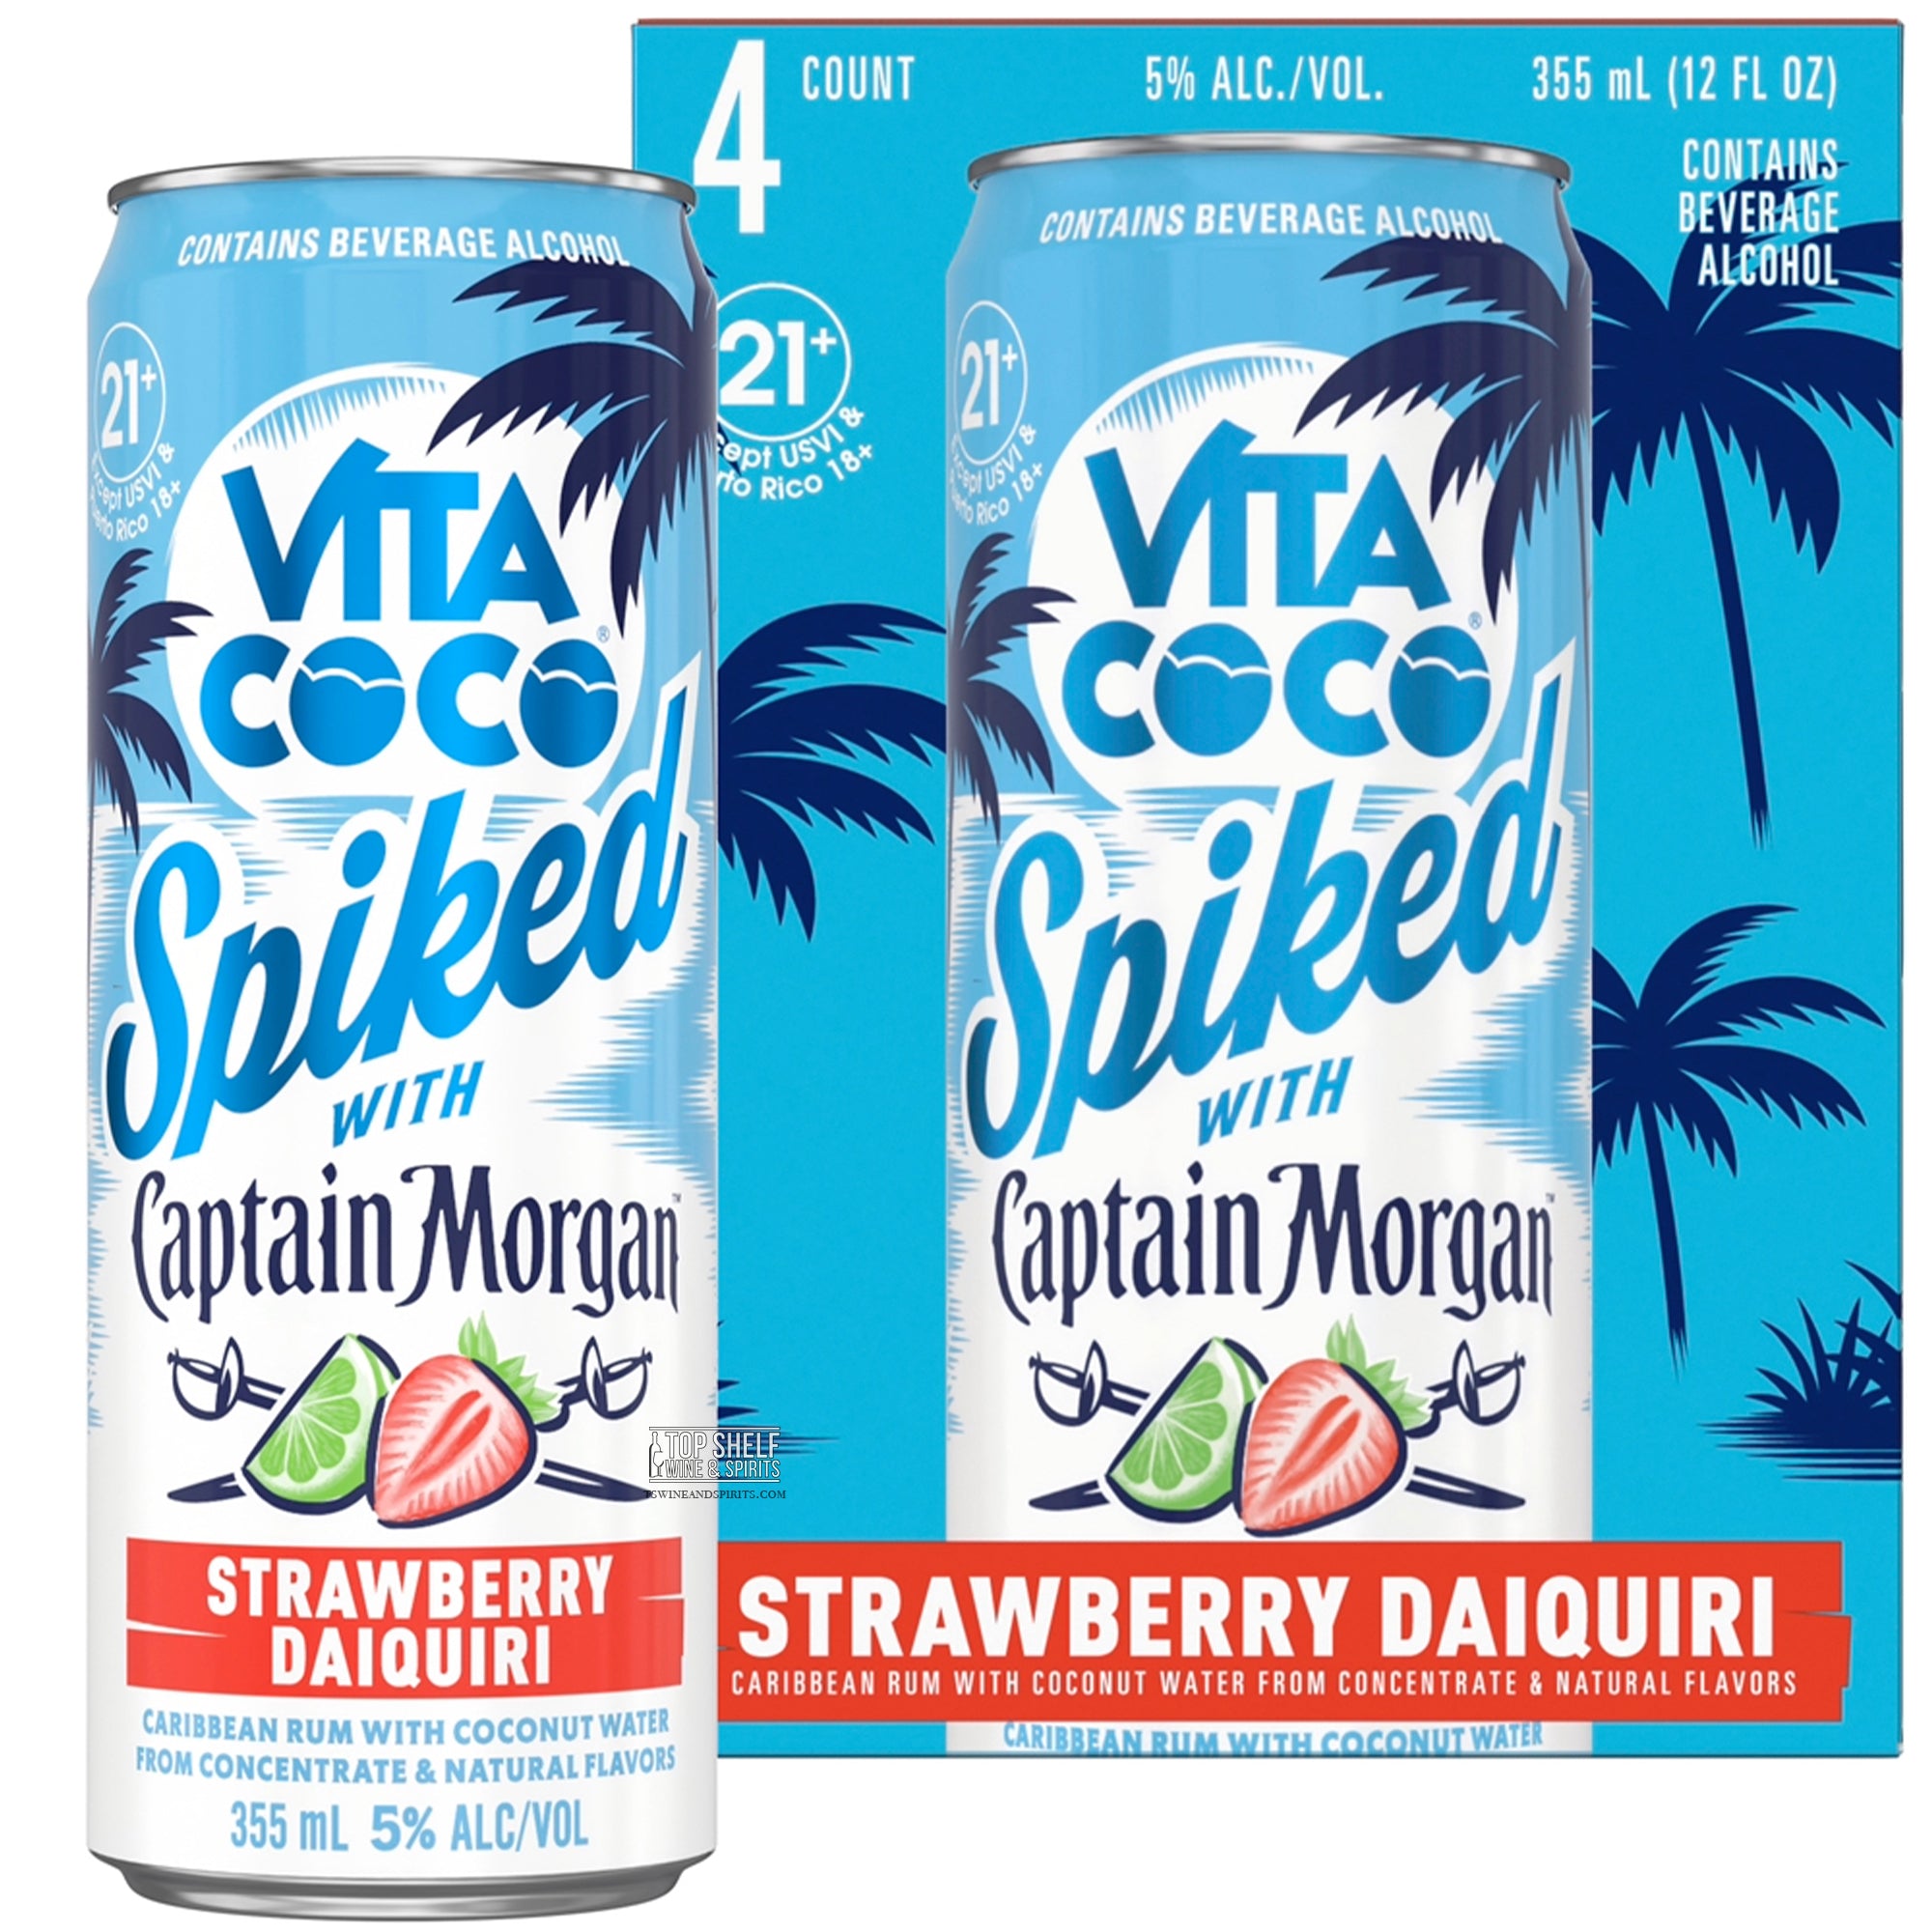 Vita Coco Spiked with Captain Morgan: Strawberry Daiquiri (4 Pack Cans)